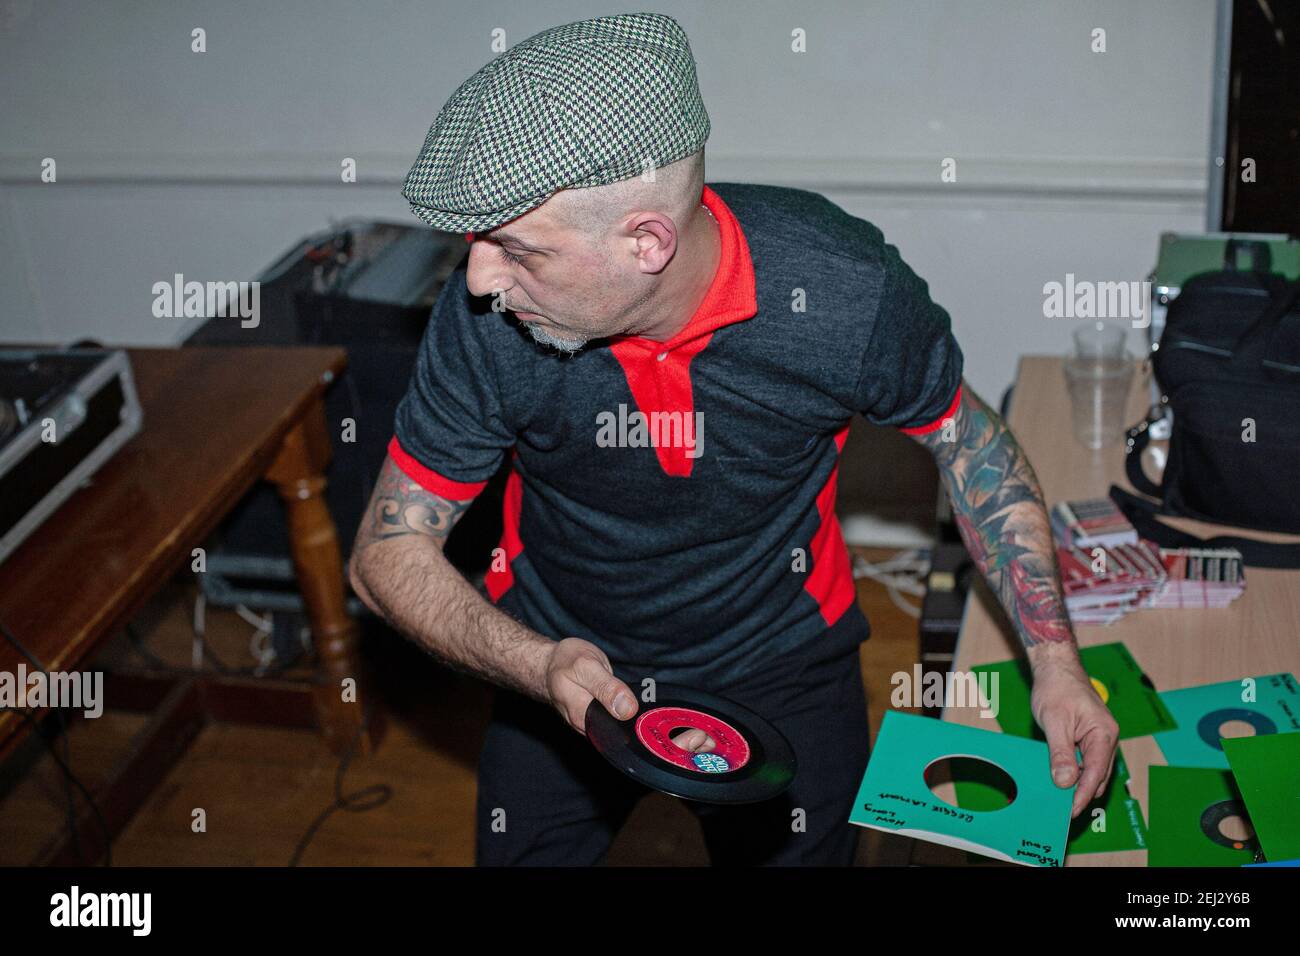 dj mixing records,  DJ busy changing records. Stock Photo